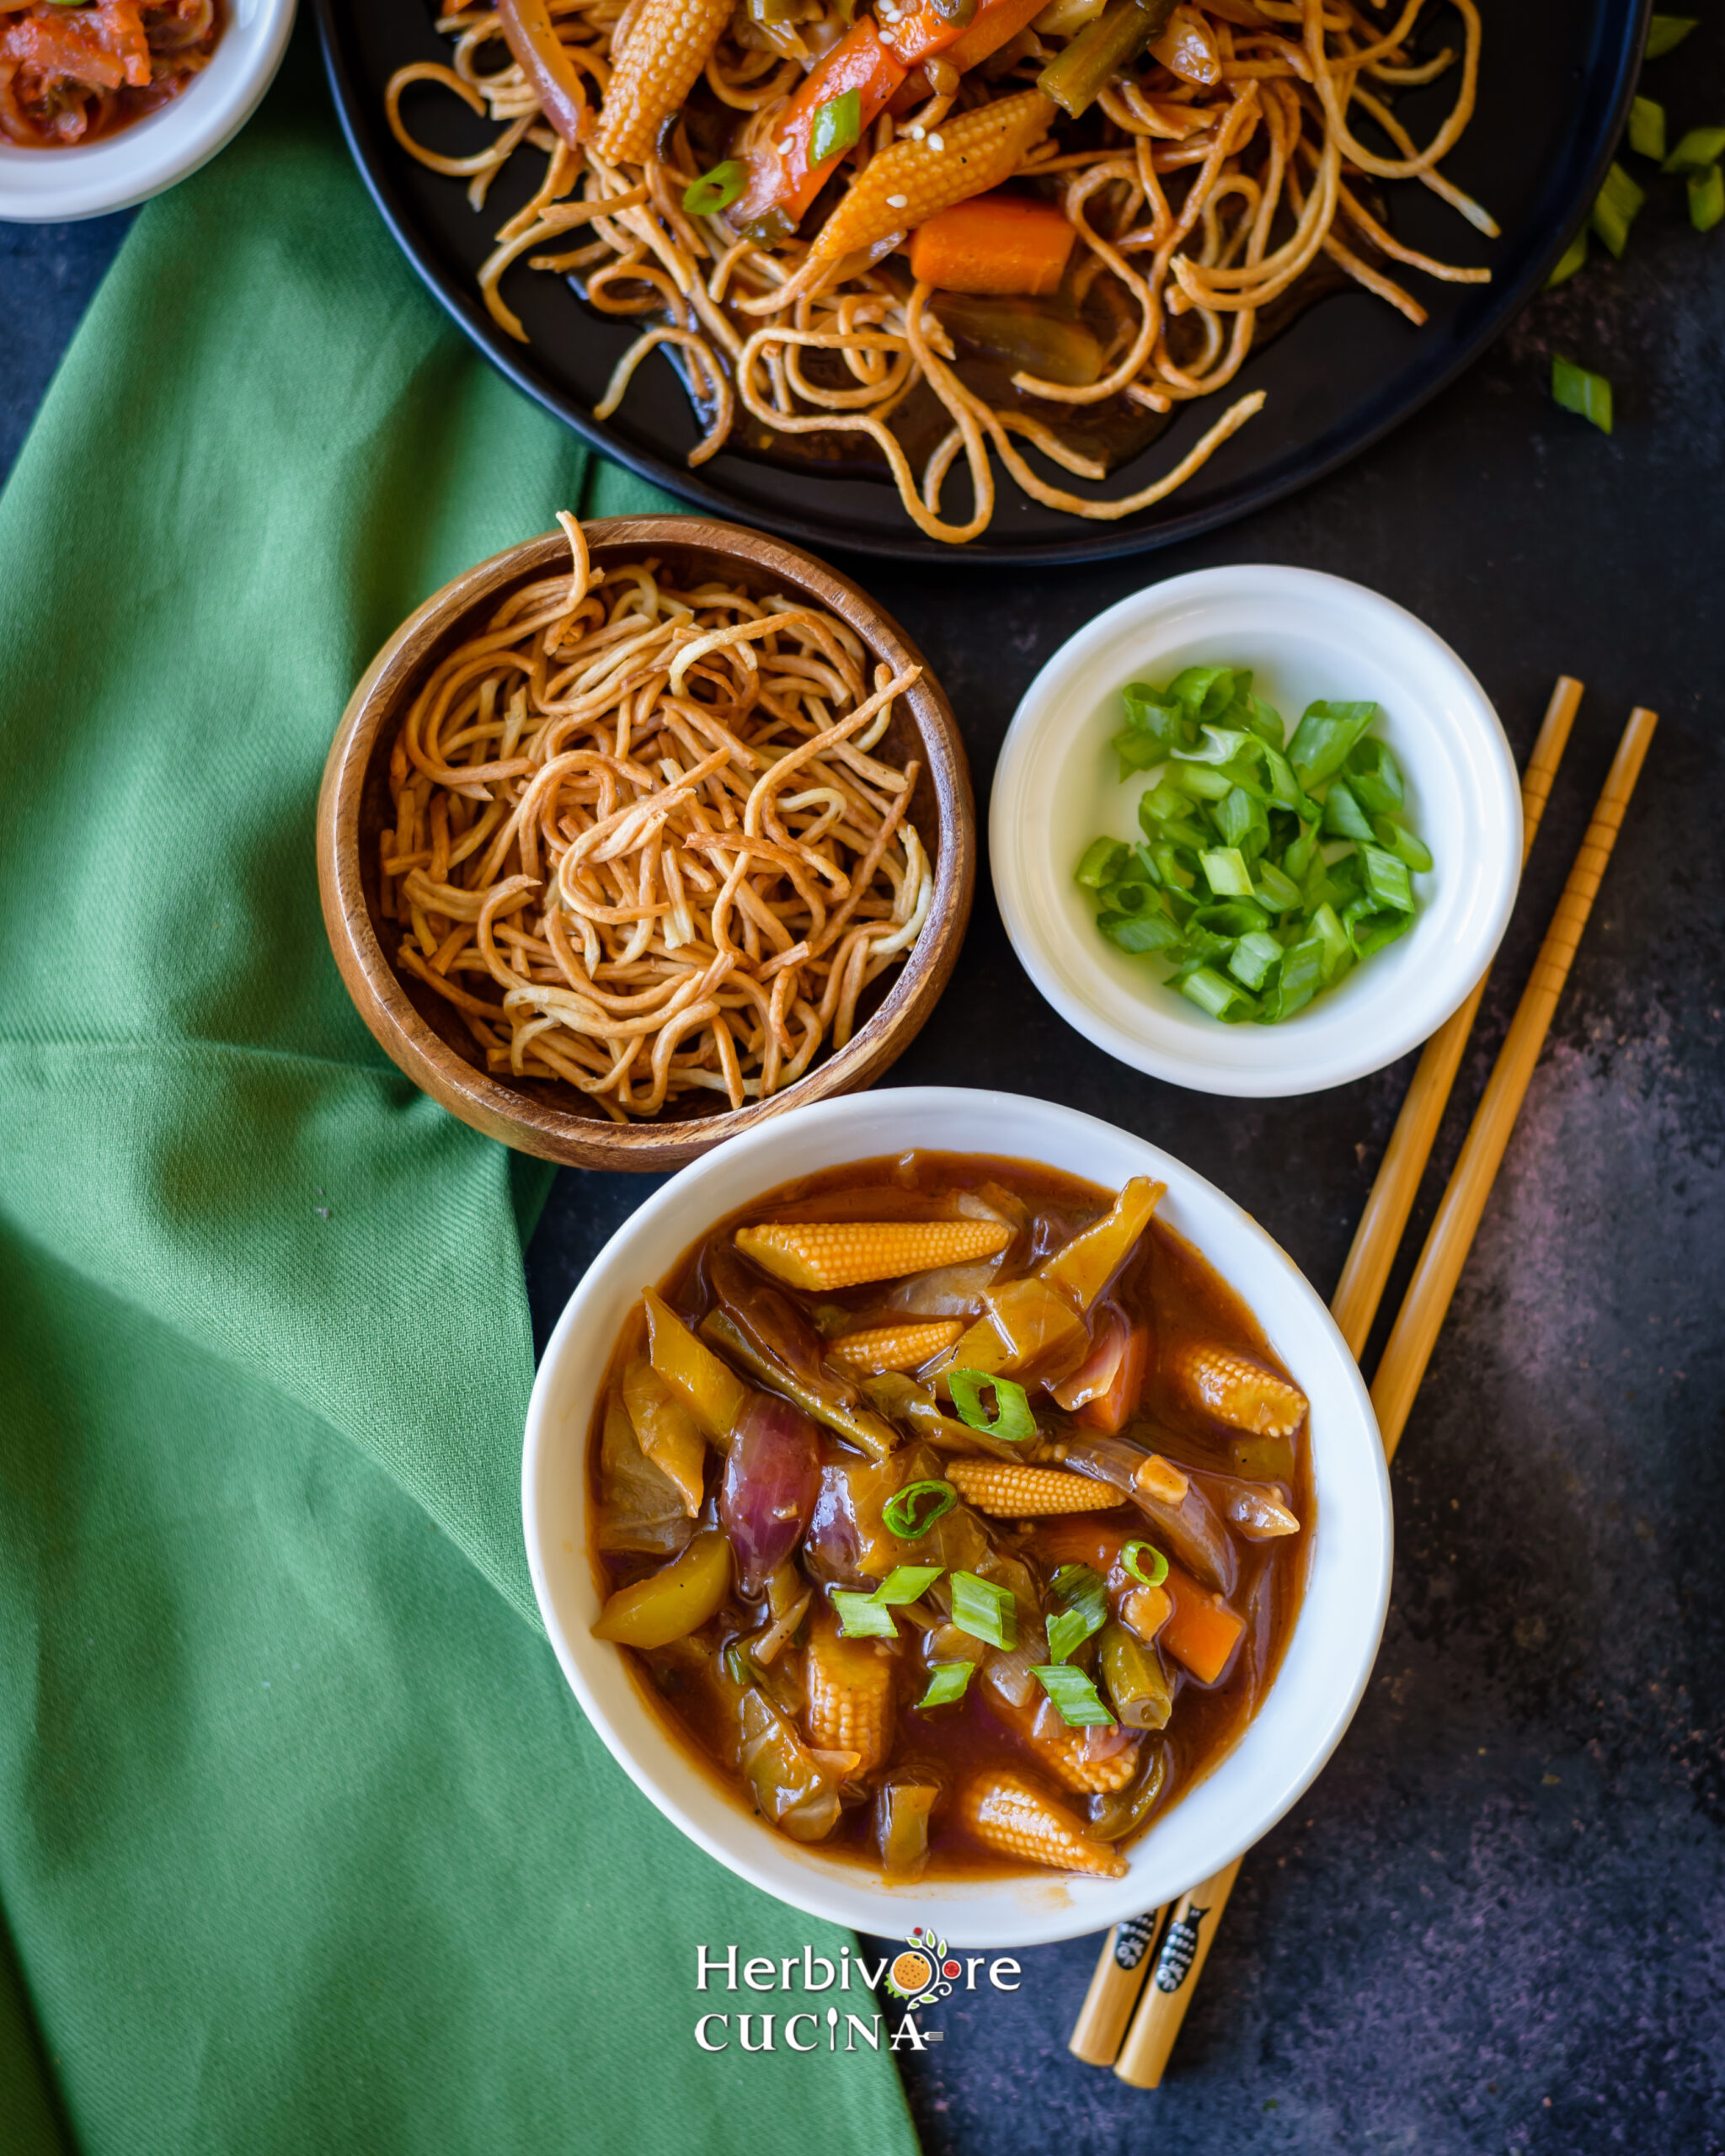 Fried Noodles and mixed vegetables in two small bowls on a black background. 